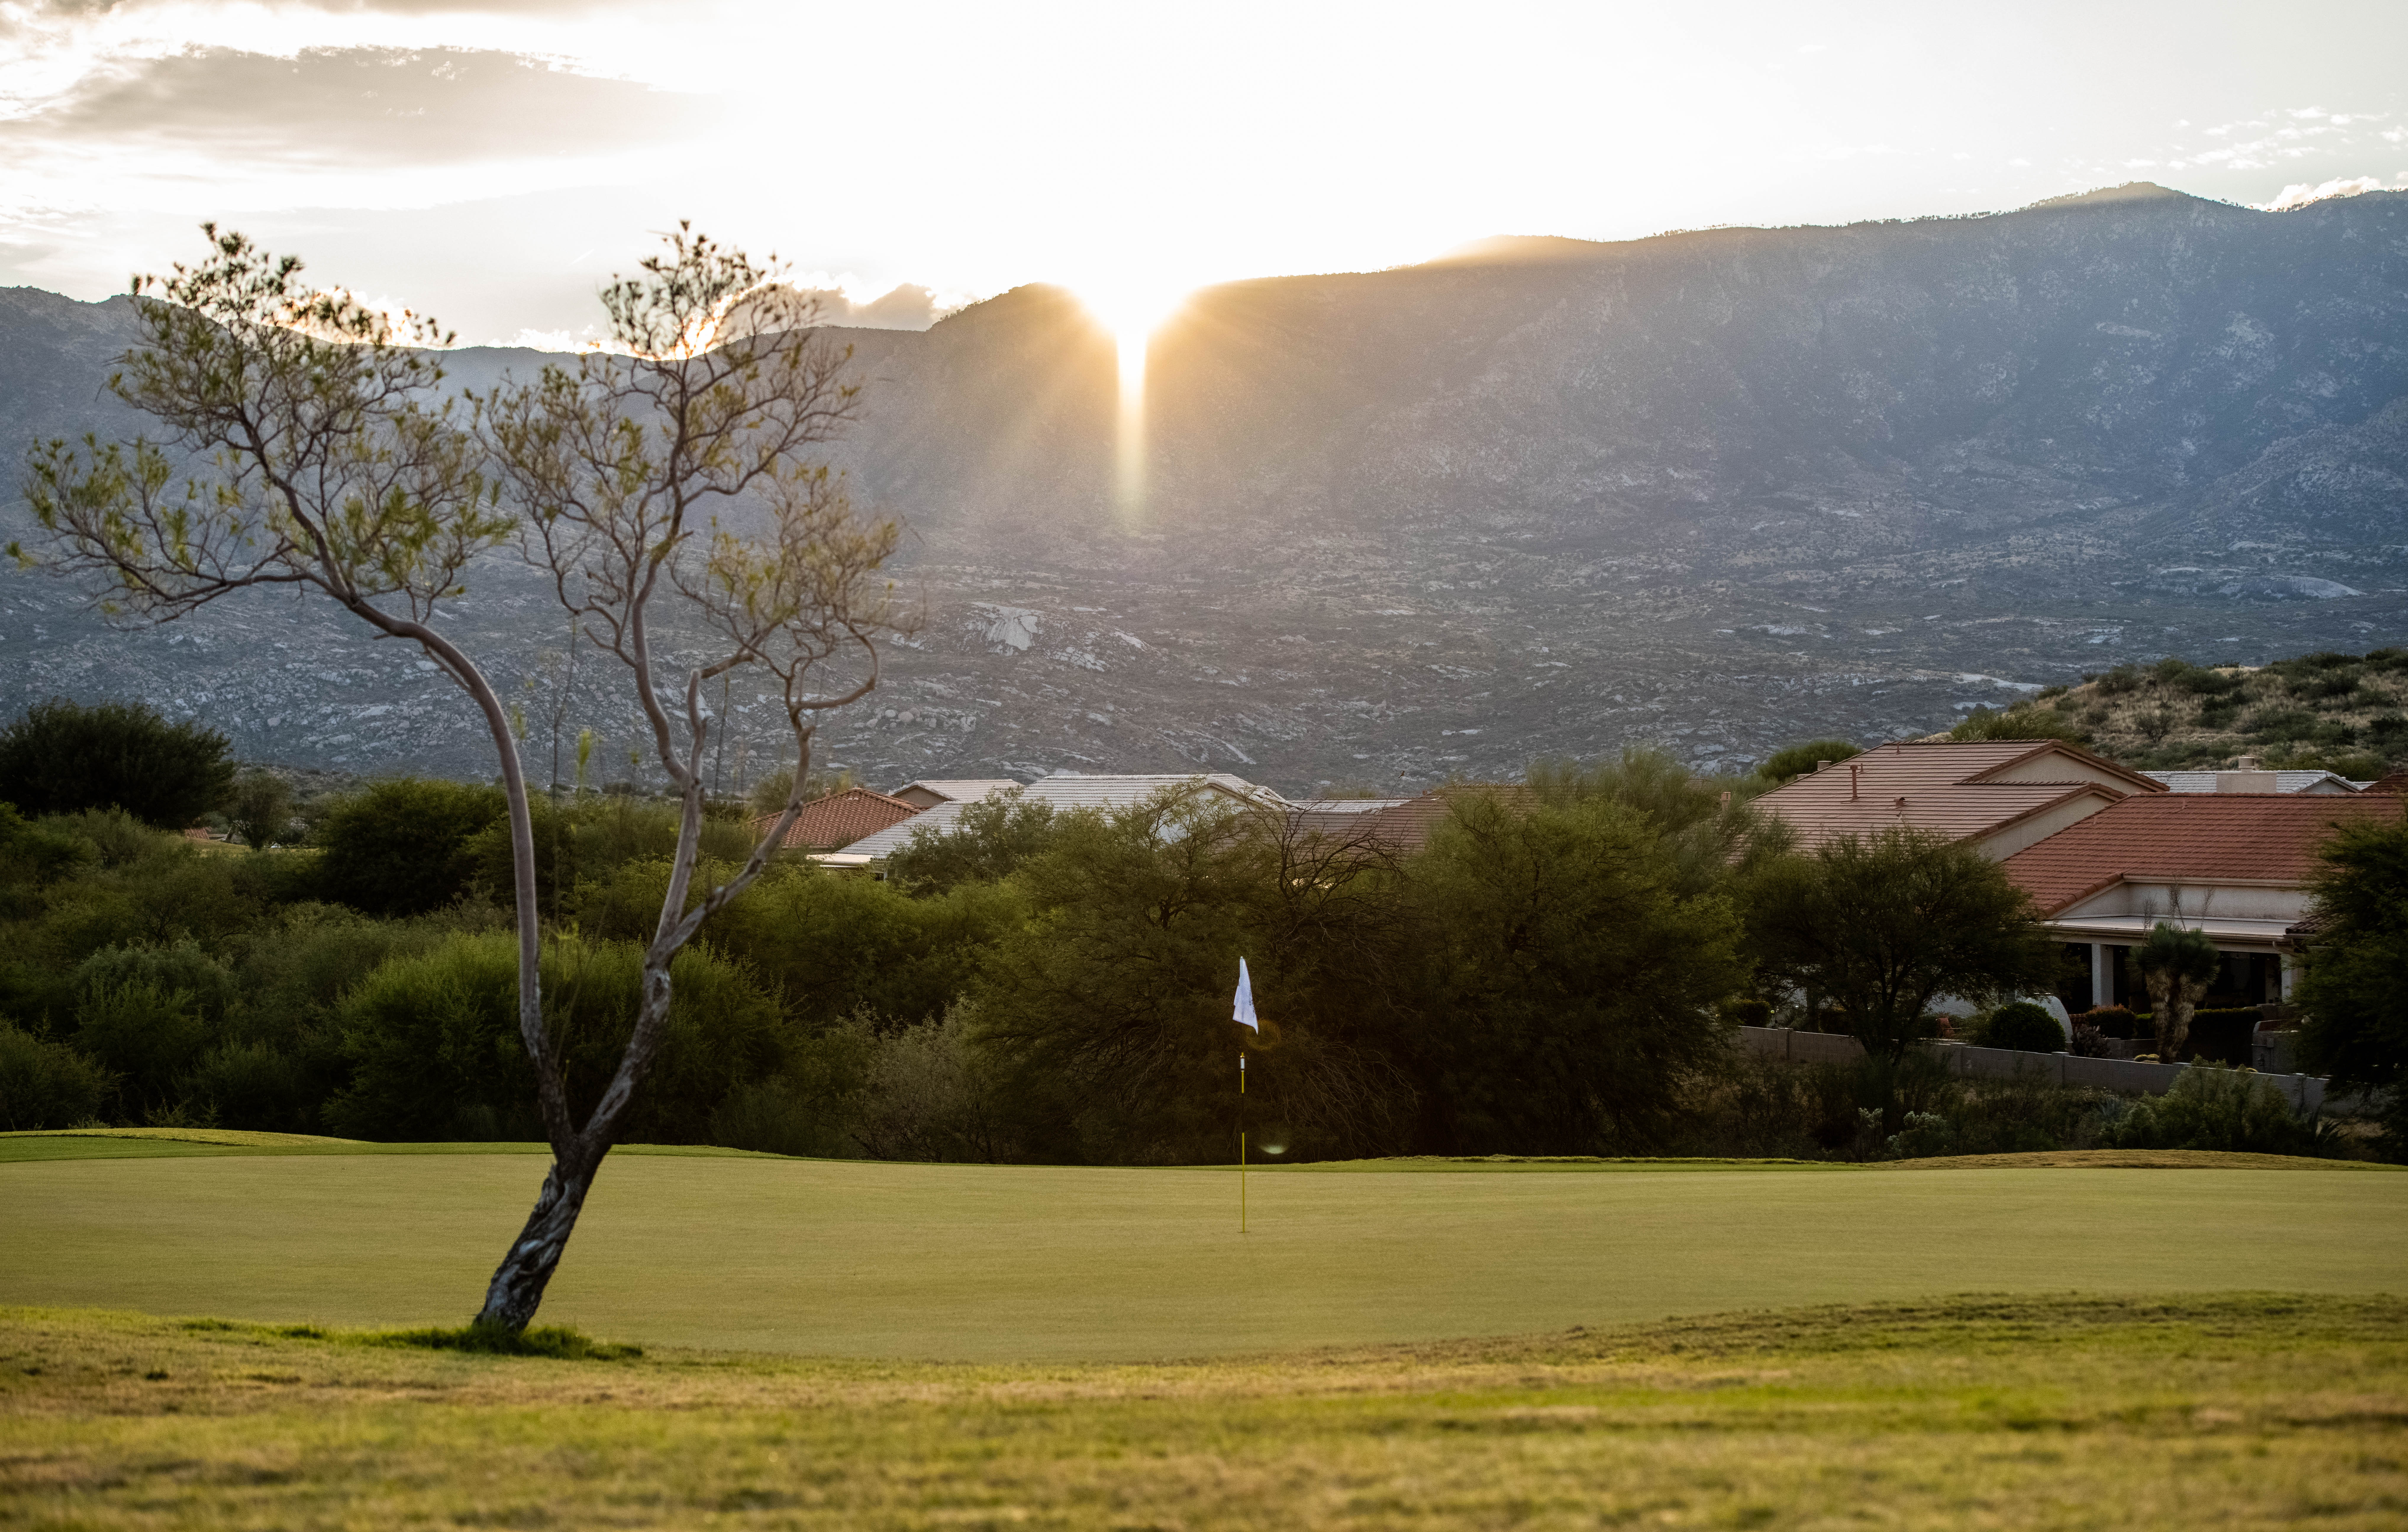 flag near tree with mountains behind the course